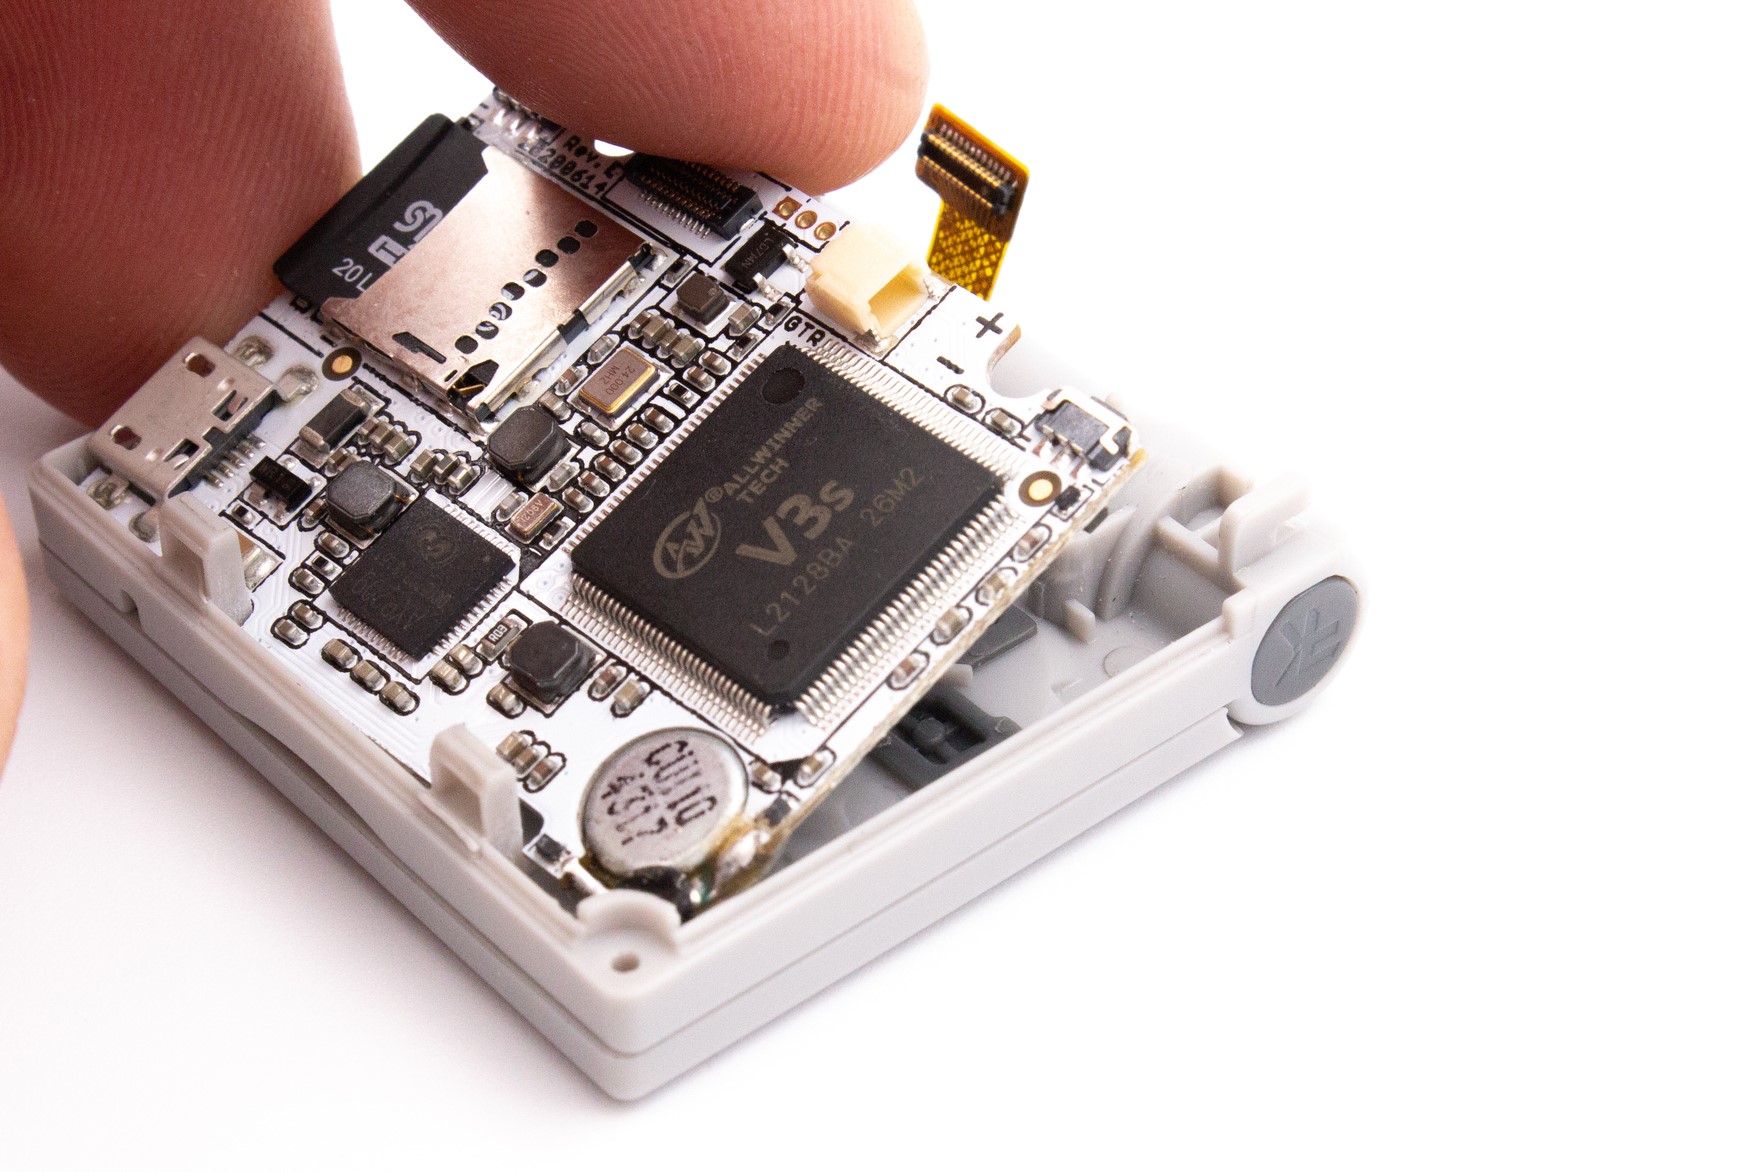 Pull PCB by its micro-USB port